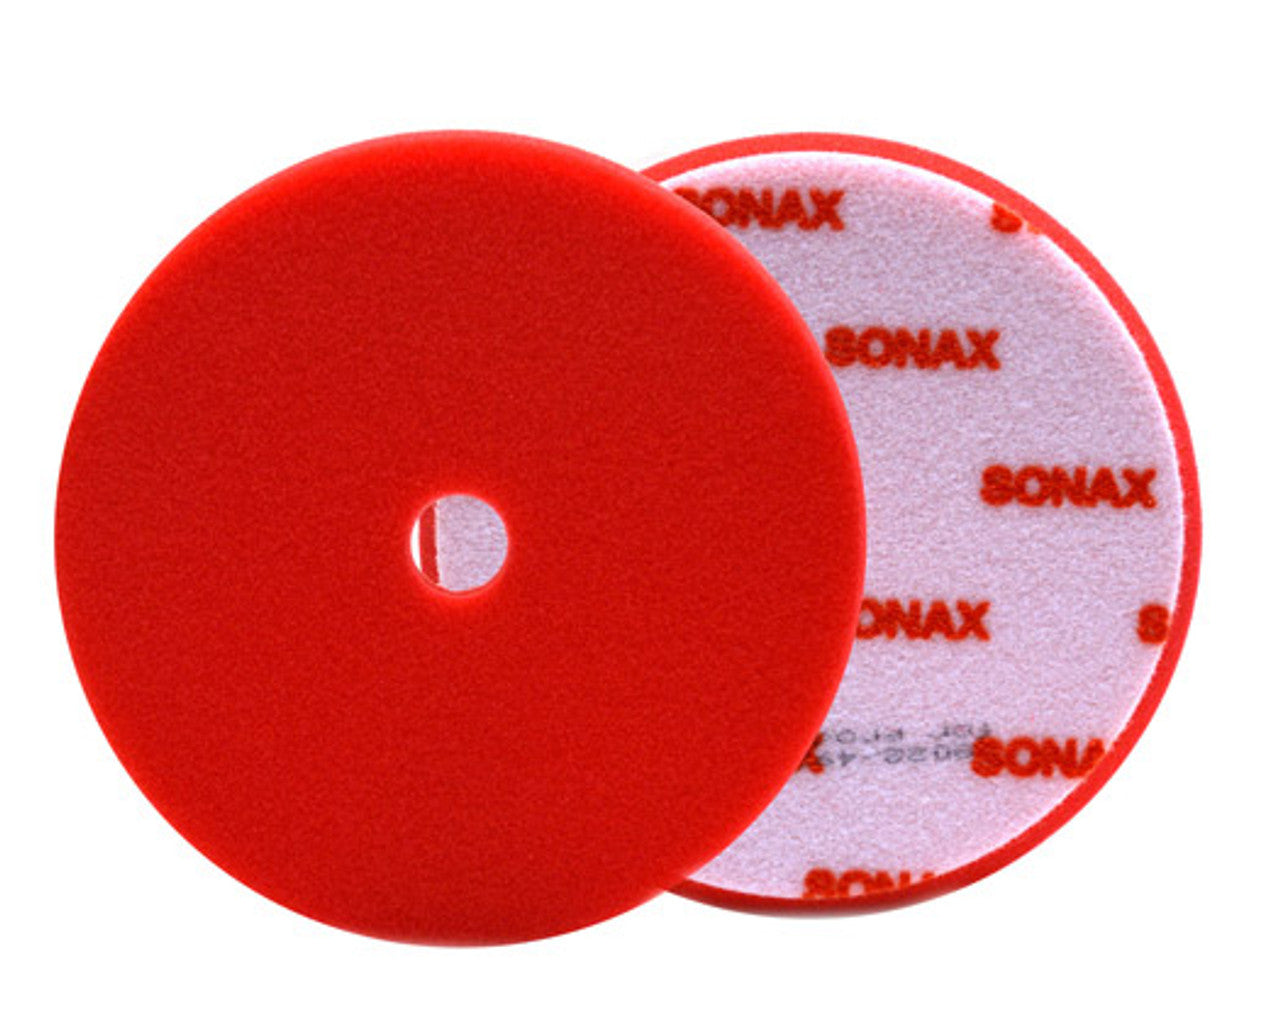 Sonax Red Hard Cutting/Polishing Pad - 6.5 inches (165 mm) - Sierra Madre Collection